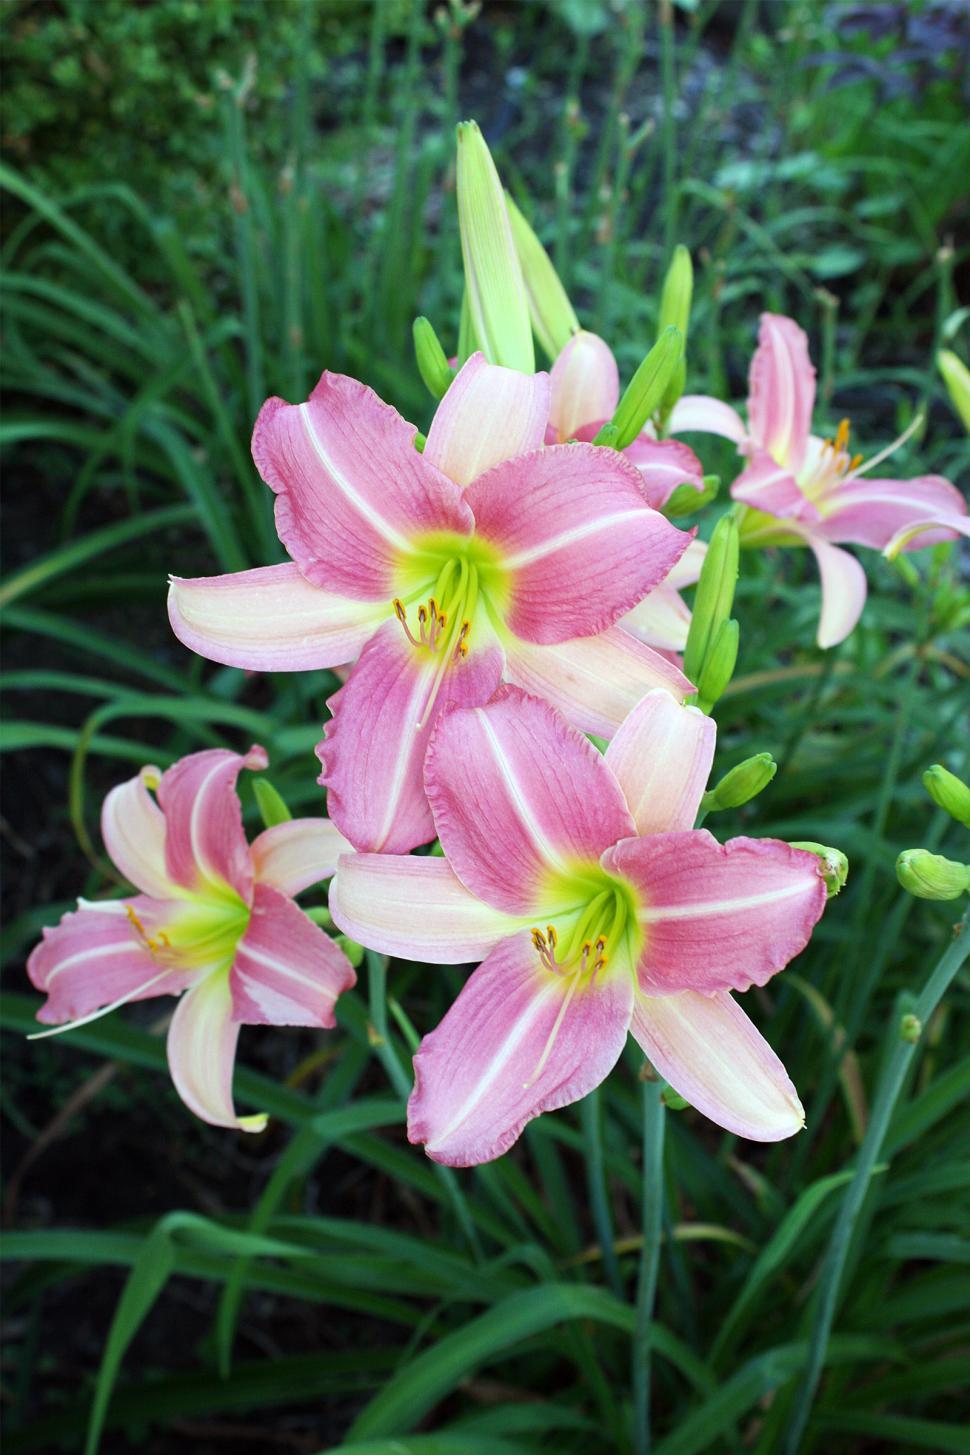 Free Image of Pink Day Lilies Bloom In Garden 